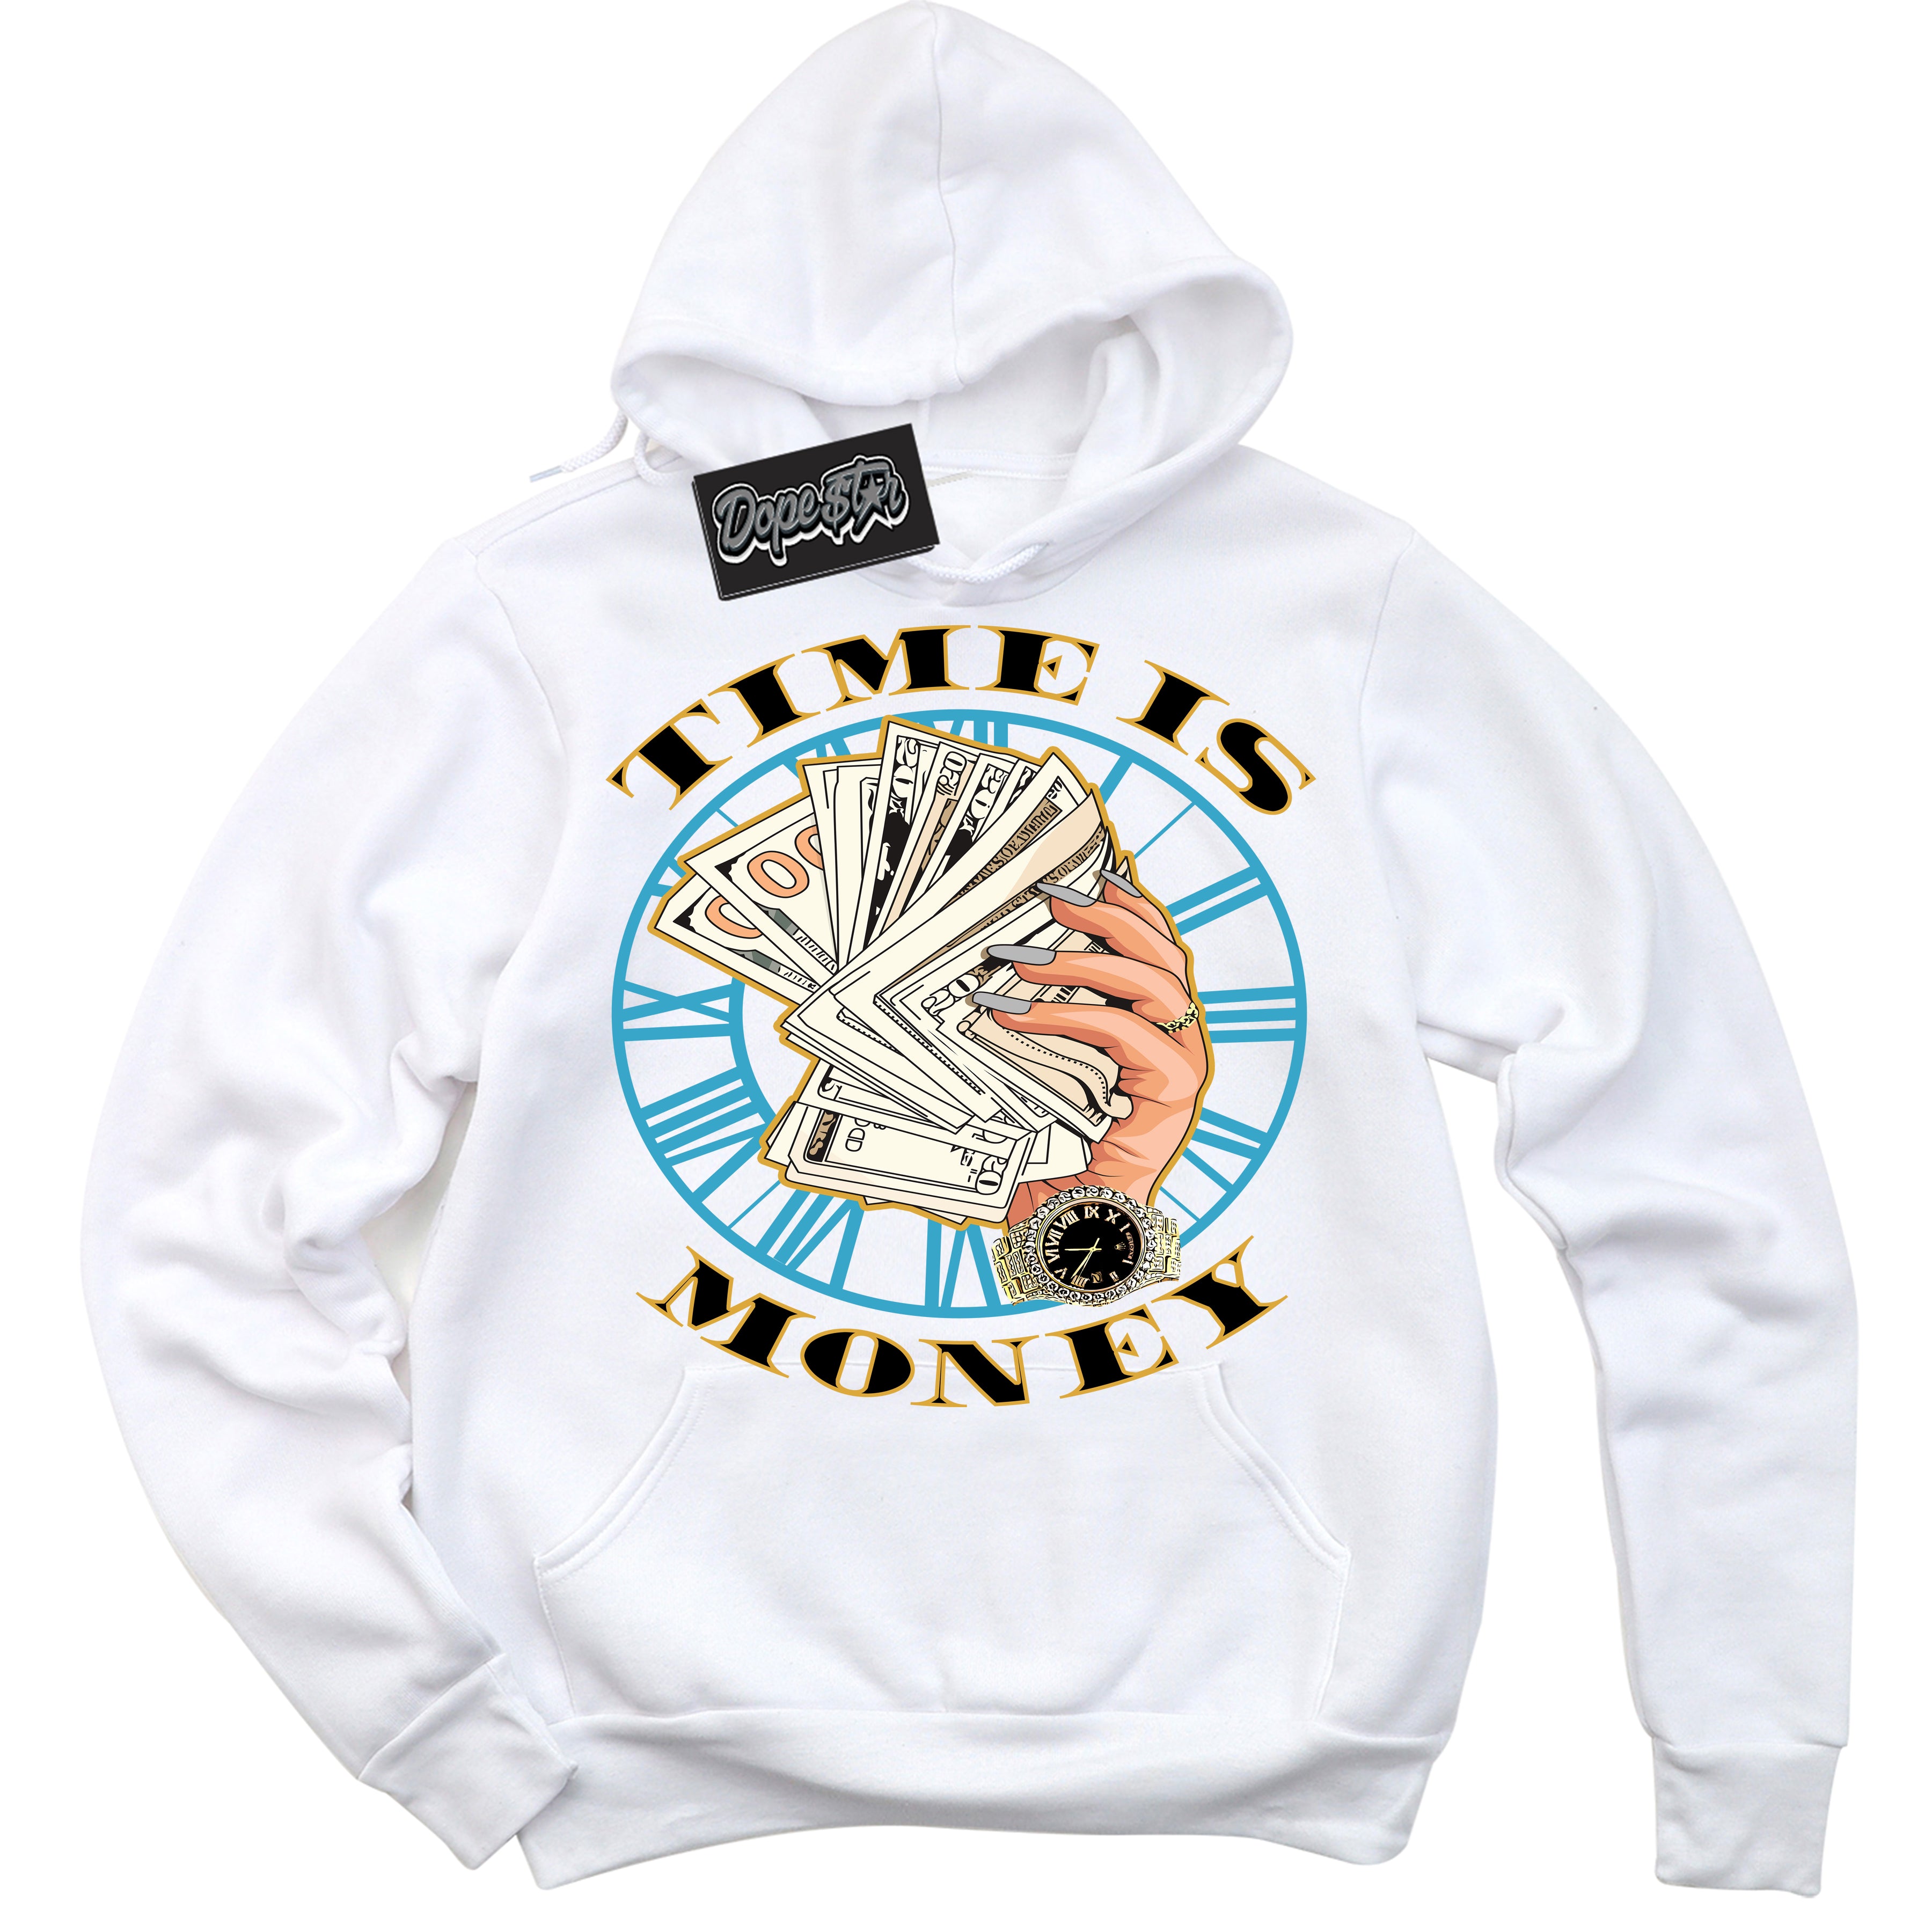 Cool White Hoodie with “ Time Is Money ”  design that Perfectly Matches Aqua 5s Sneakers.